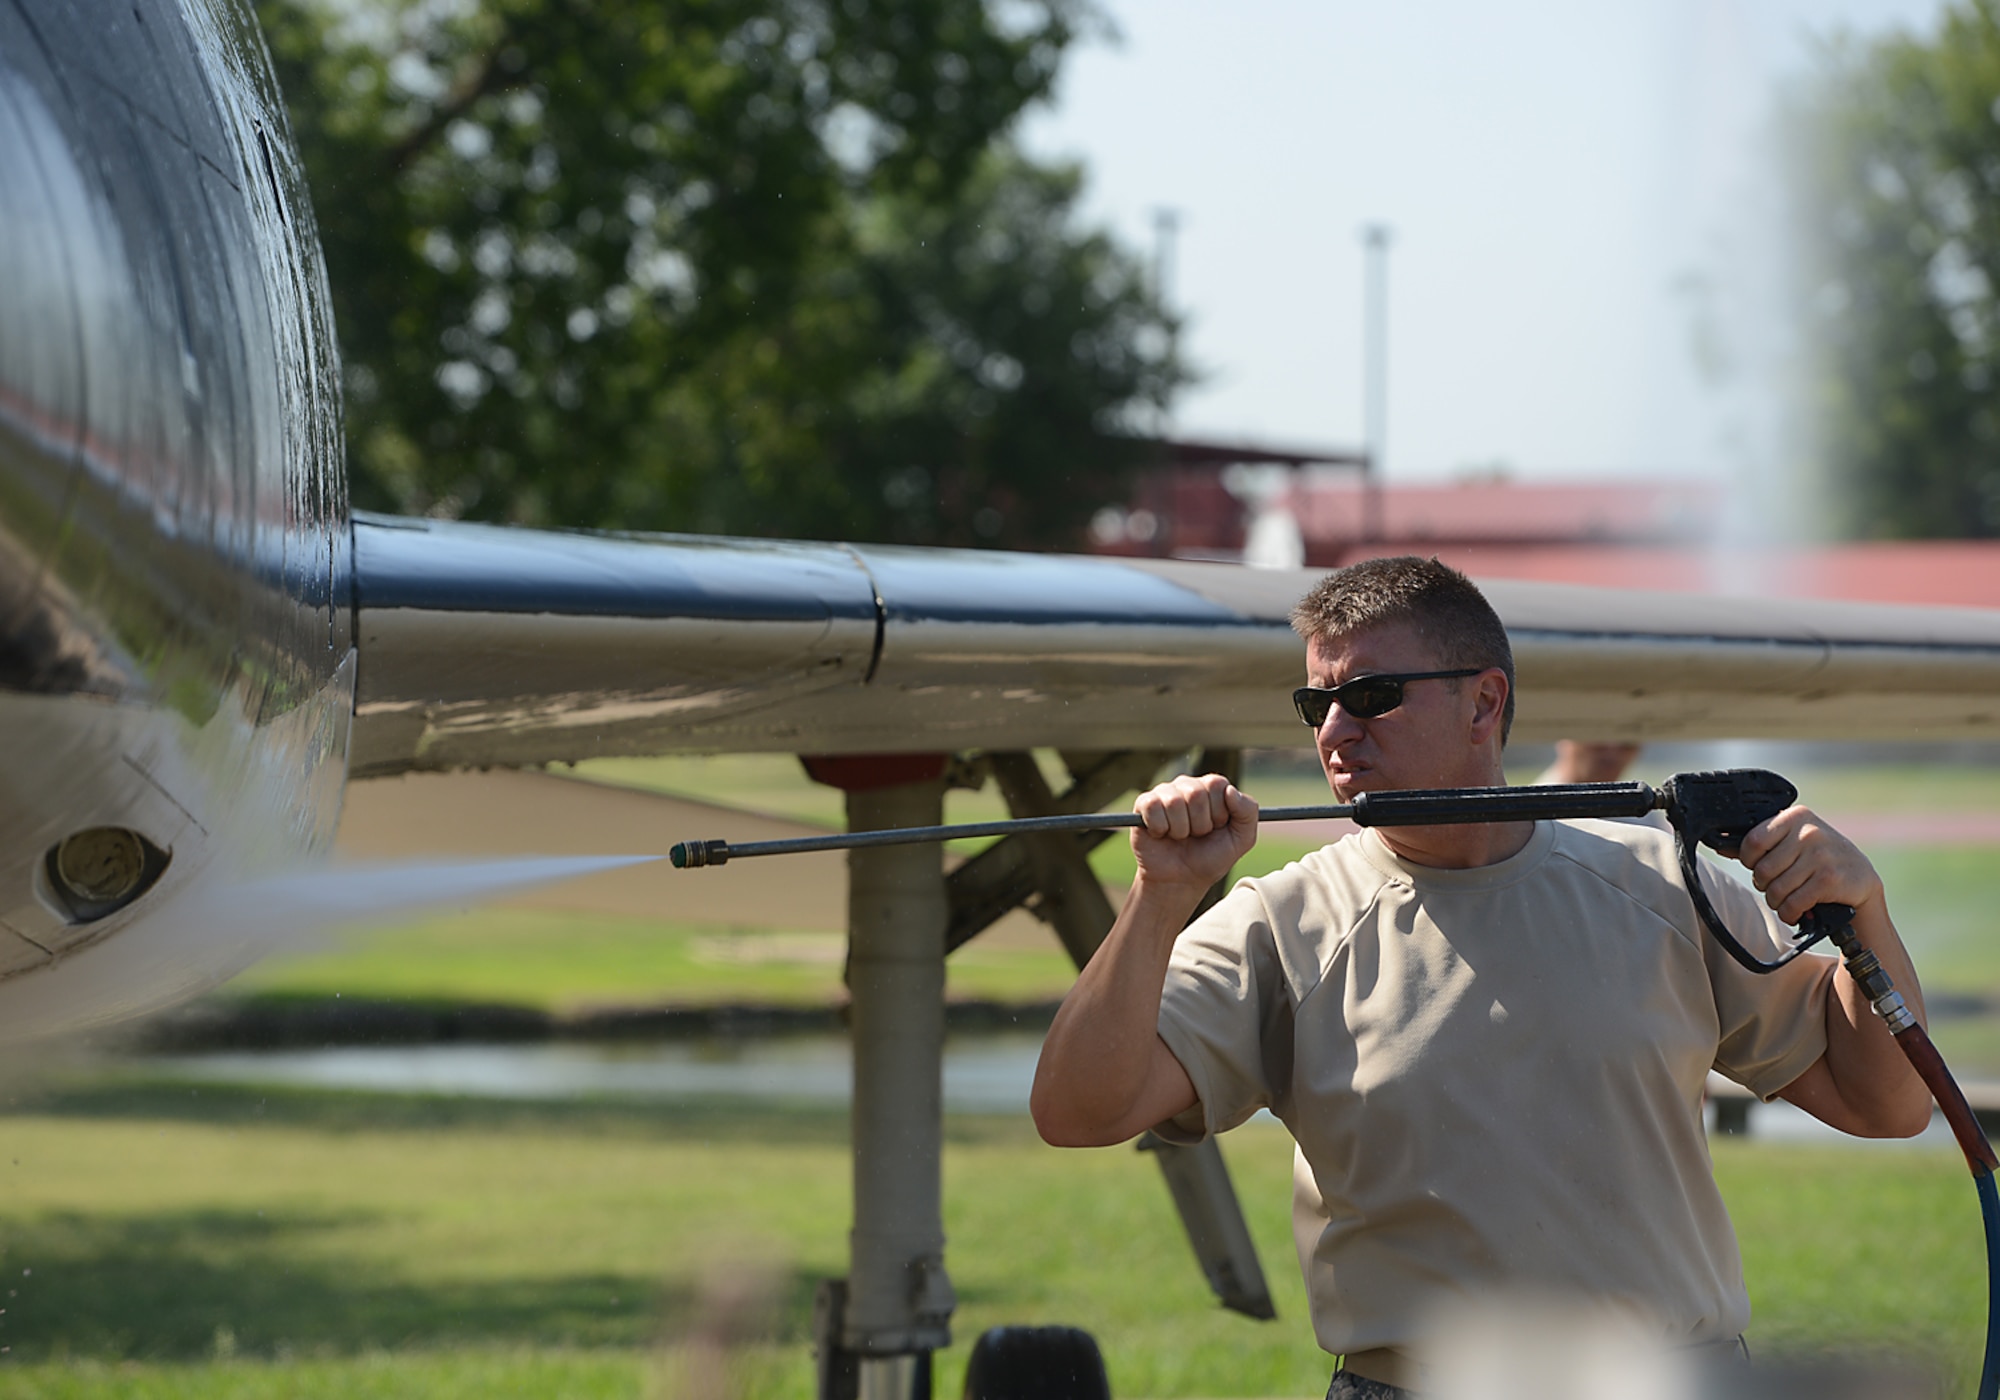 Chief Master Sergeant Bryan Blansett, 138th Civil Engineering Squadron Chief,  power washes the fuselage of an F-100 static display aircraft at the Tulsa Air National Guard base, Tulsa Okla., 29 July 2014.  Members of the 138th FW Chiefs Council gathered to wash the static aircraft in an effort to keep them looking nice for public display.  (U.S. National Guard photo by Senior Master Sgt.  Preston L. Chasteen/Released)